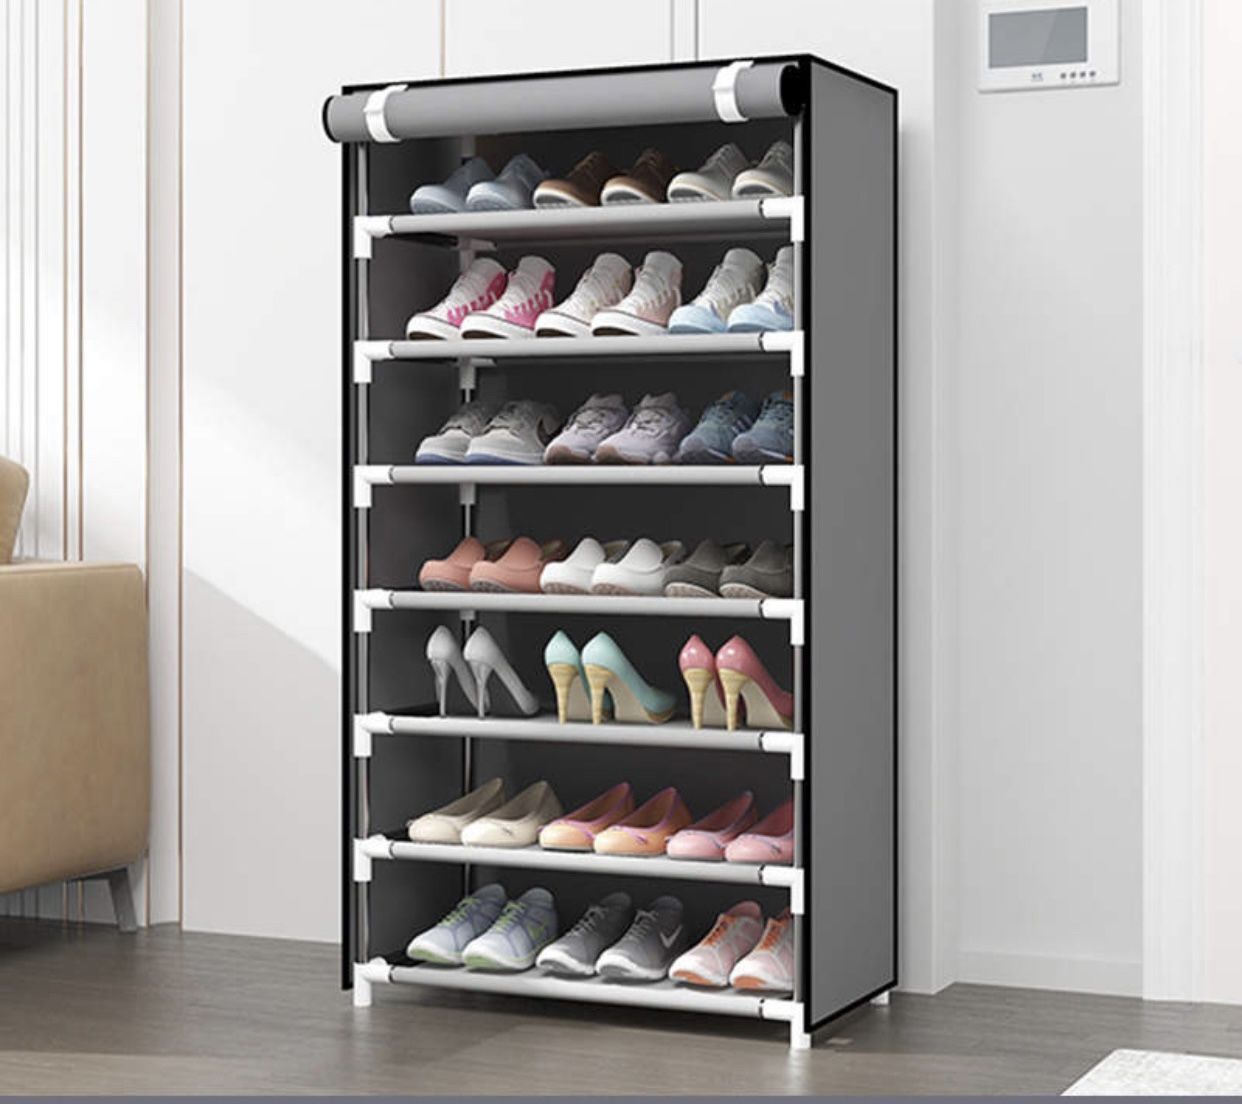 7 Tier Shoe Rack Or Storage Organizer With Cover